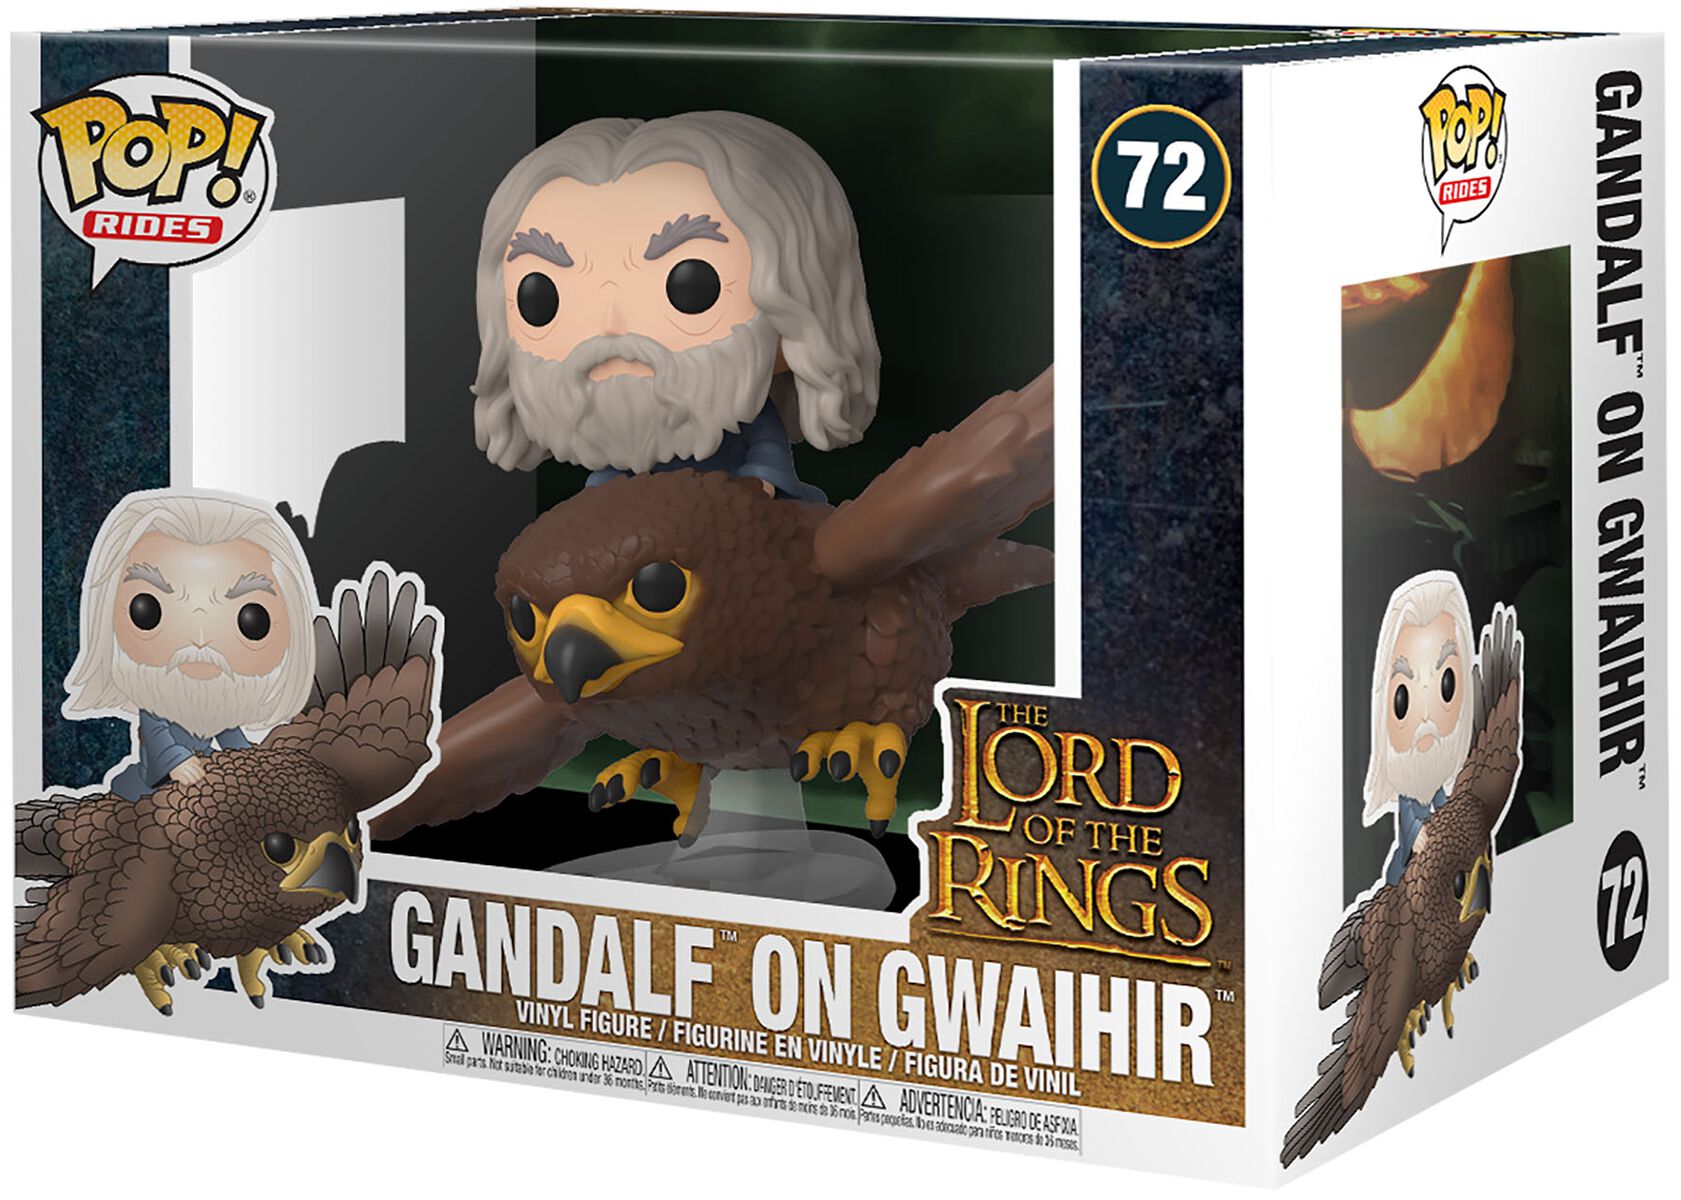 Pop! Rides - The Lord of The Rings - Gandalf on Gwaihir #72